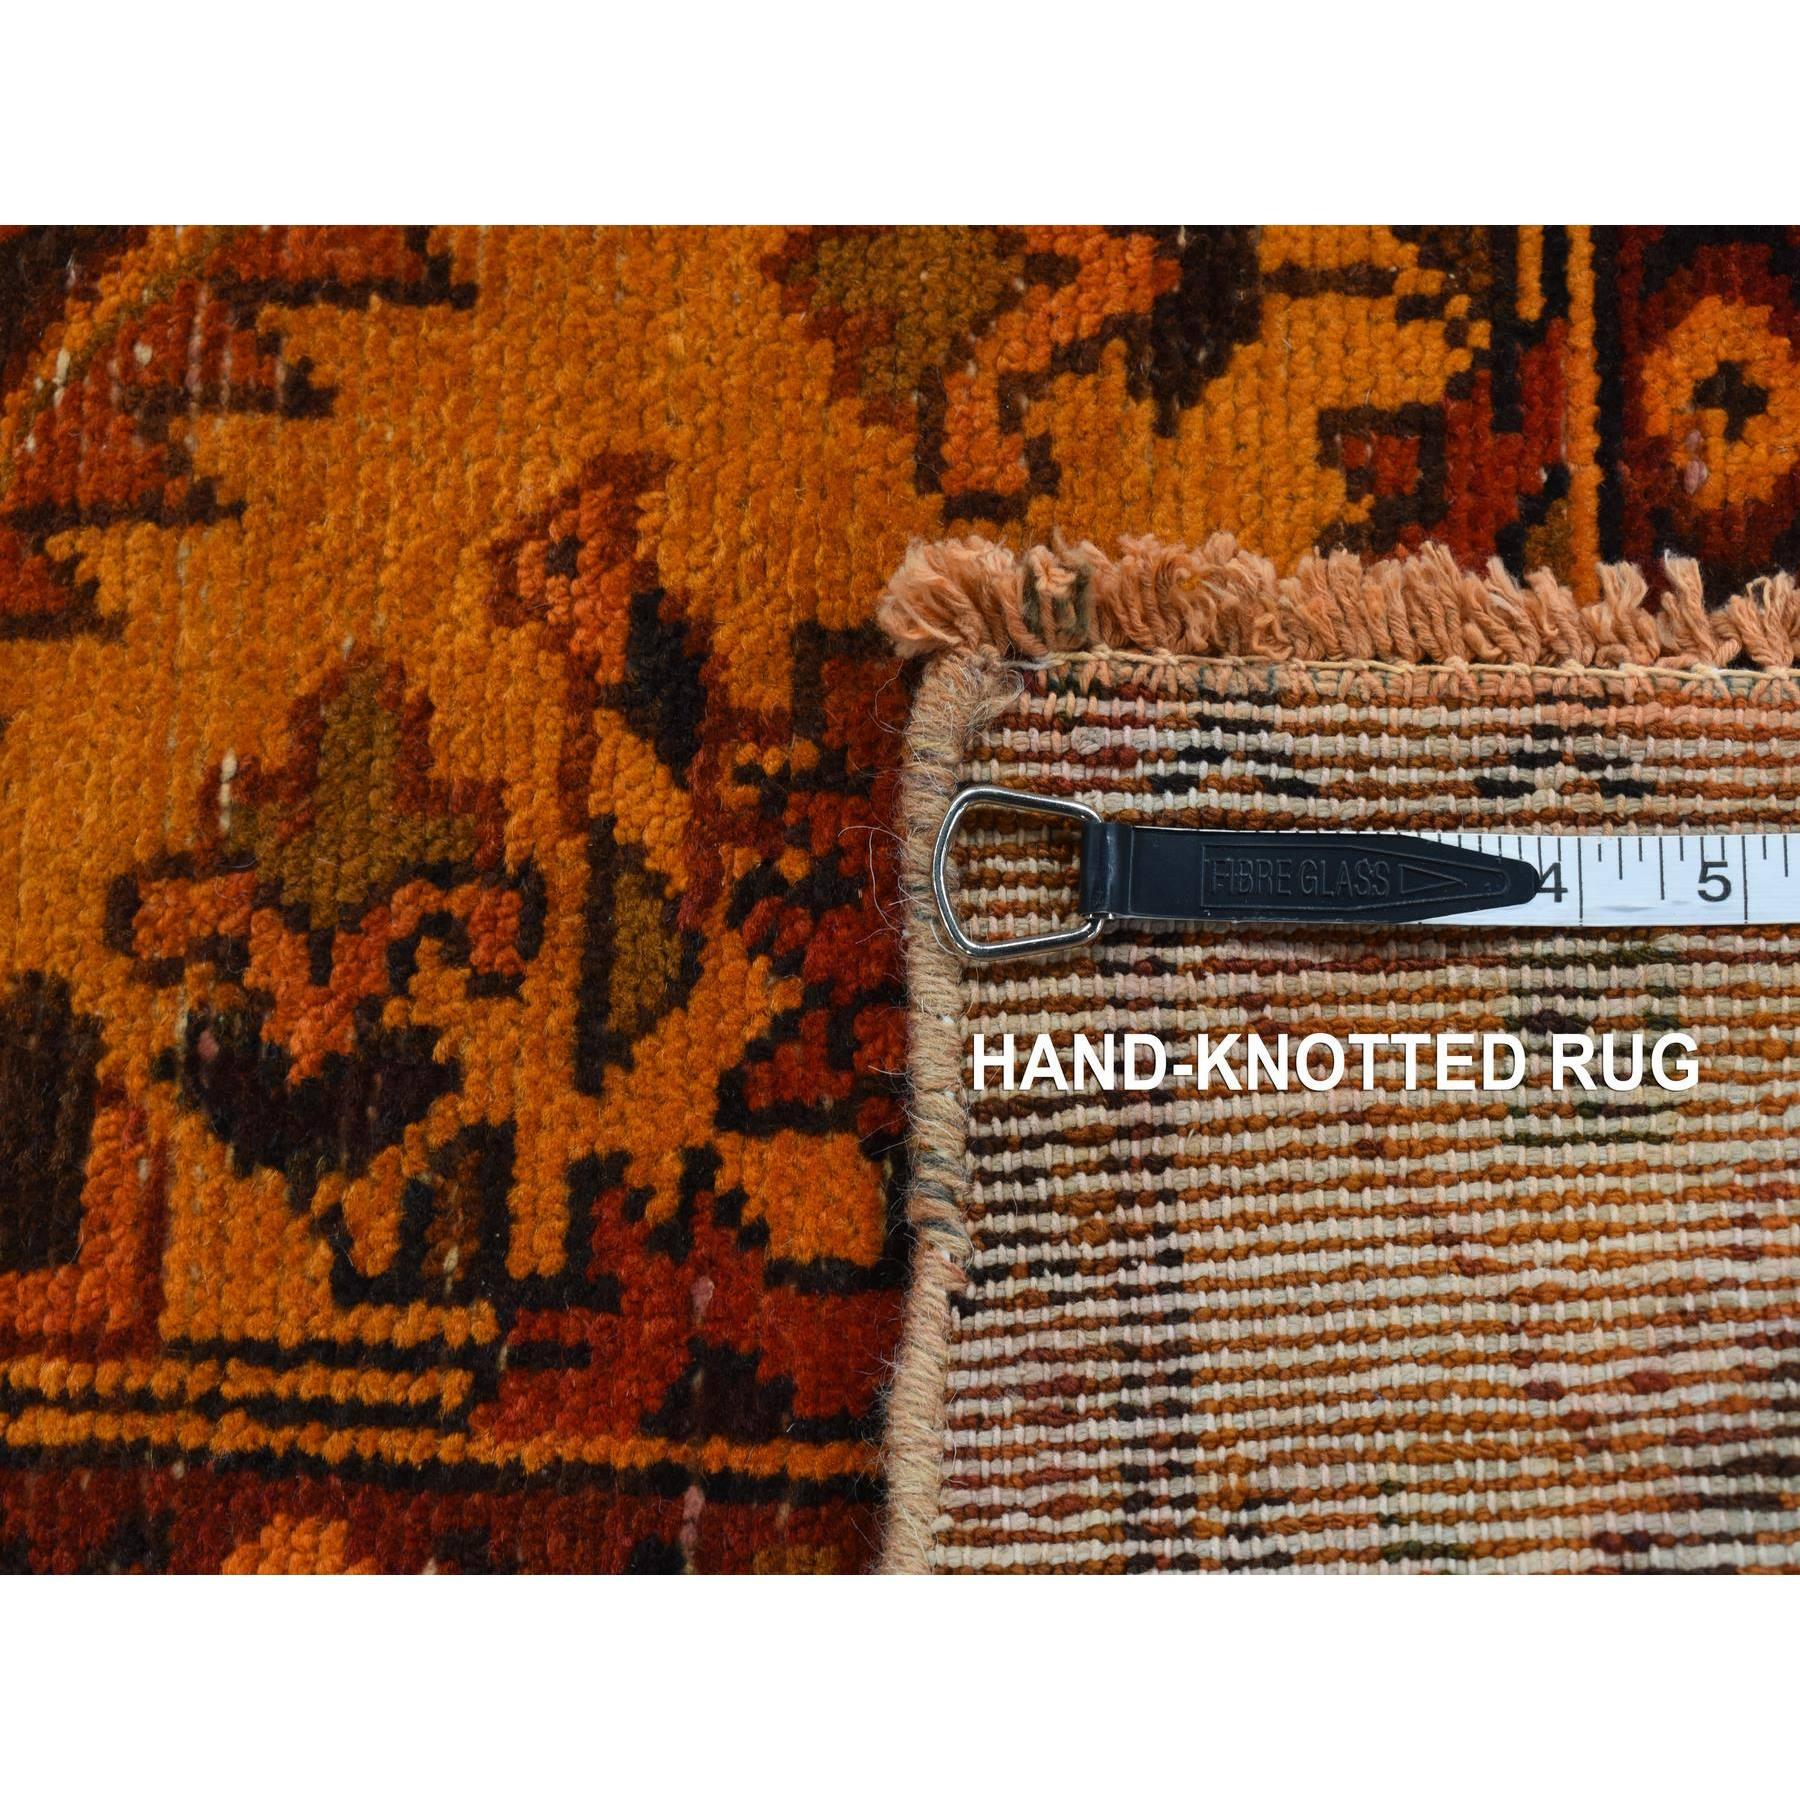 This fabulous Hand-Knotted carpet has been created and designed for extra strength and durability. This rug has been handcrafted for weeks in the traditional method that is used to make
Exact Rug Size in Feet and Inches : 4'10